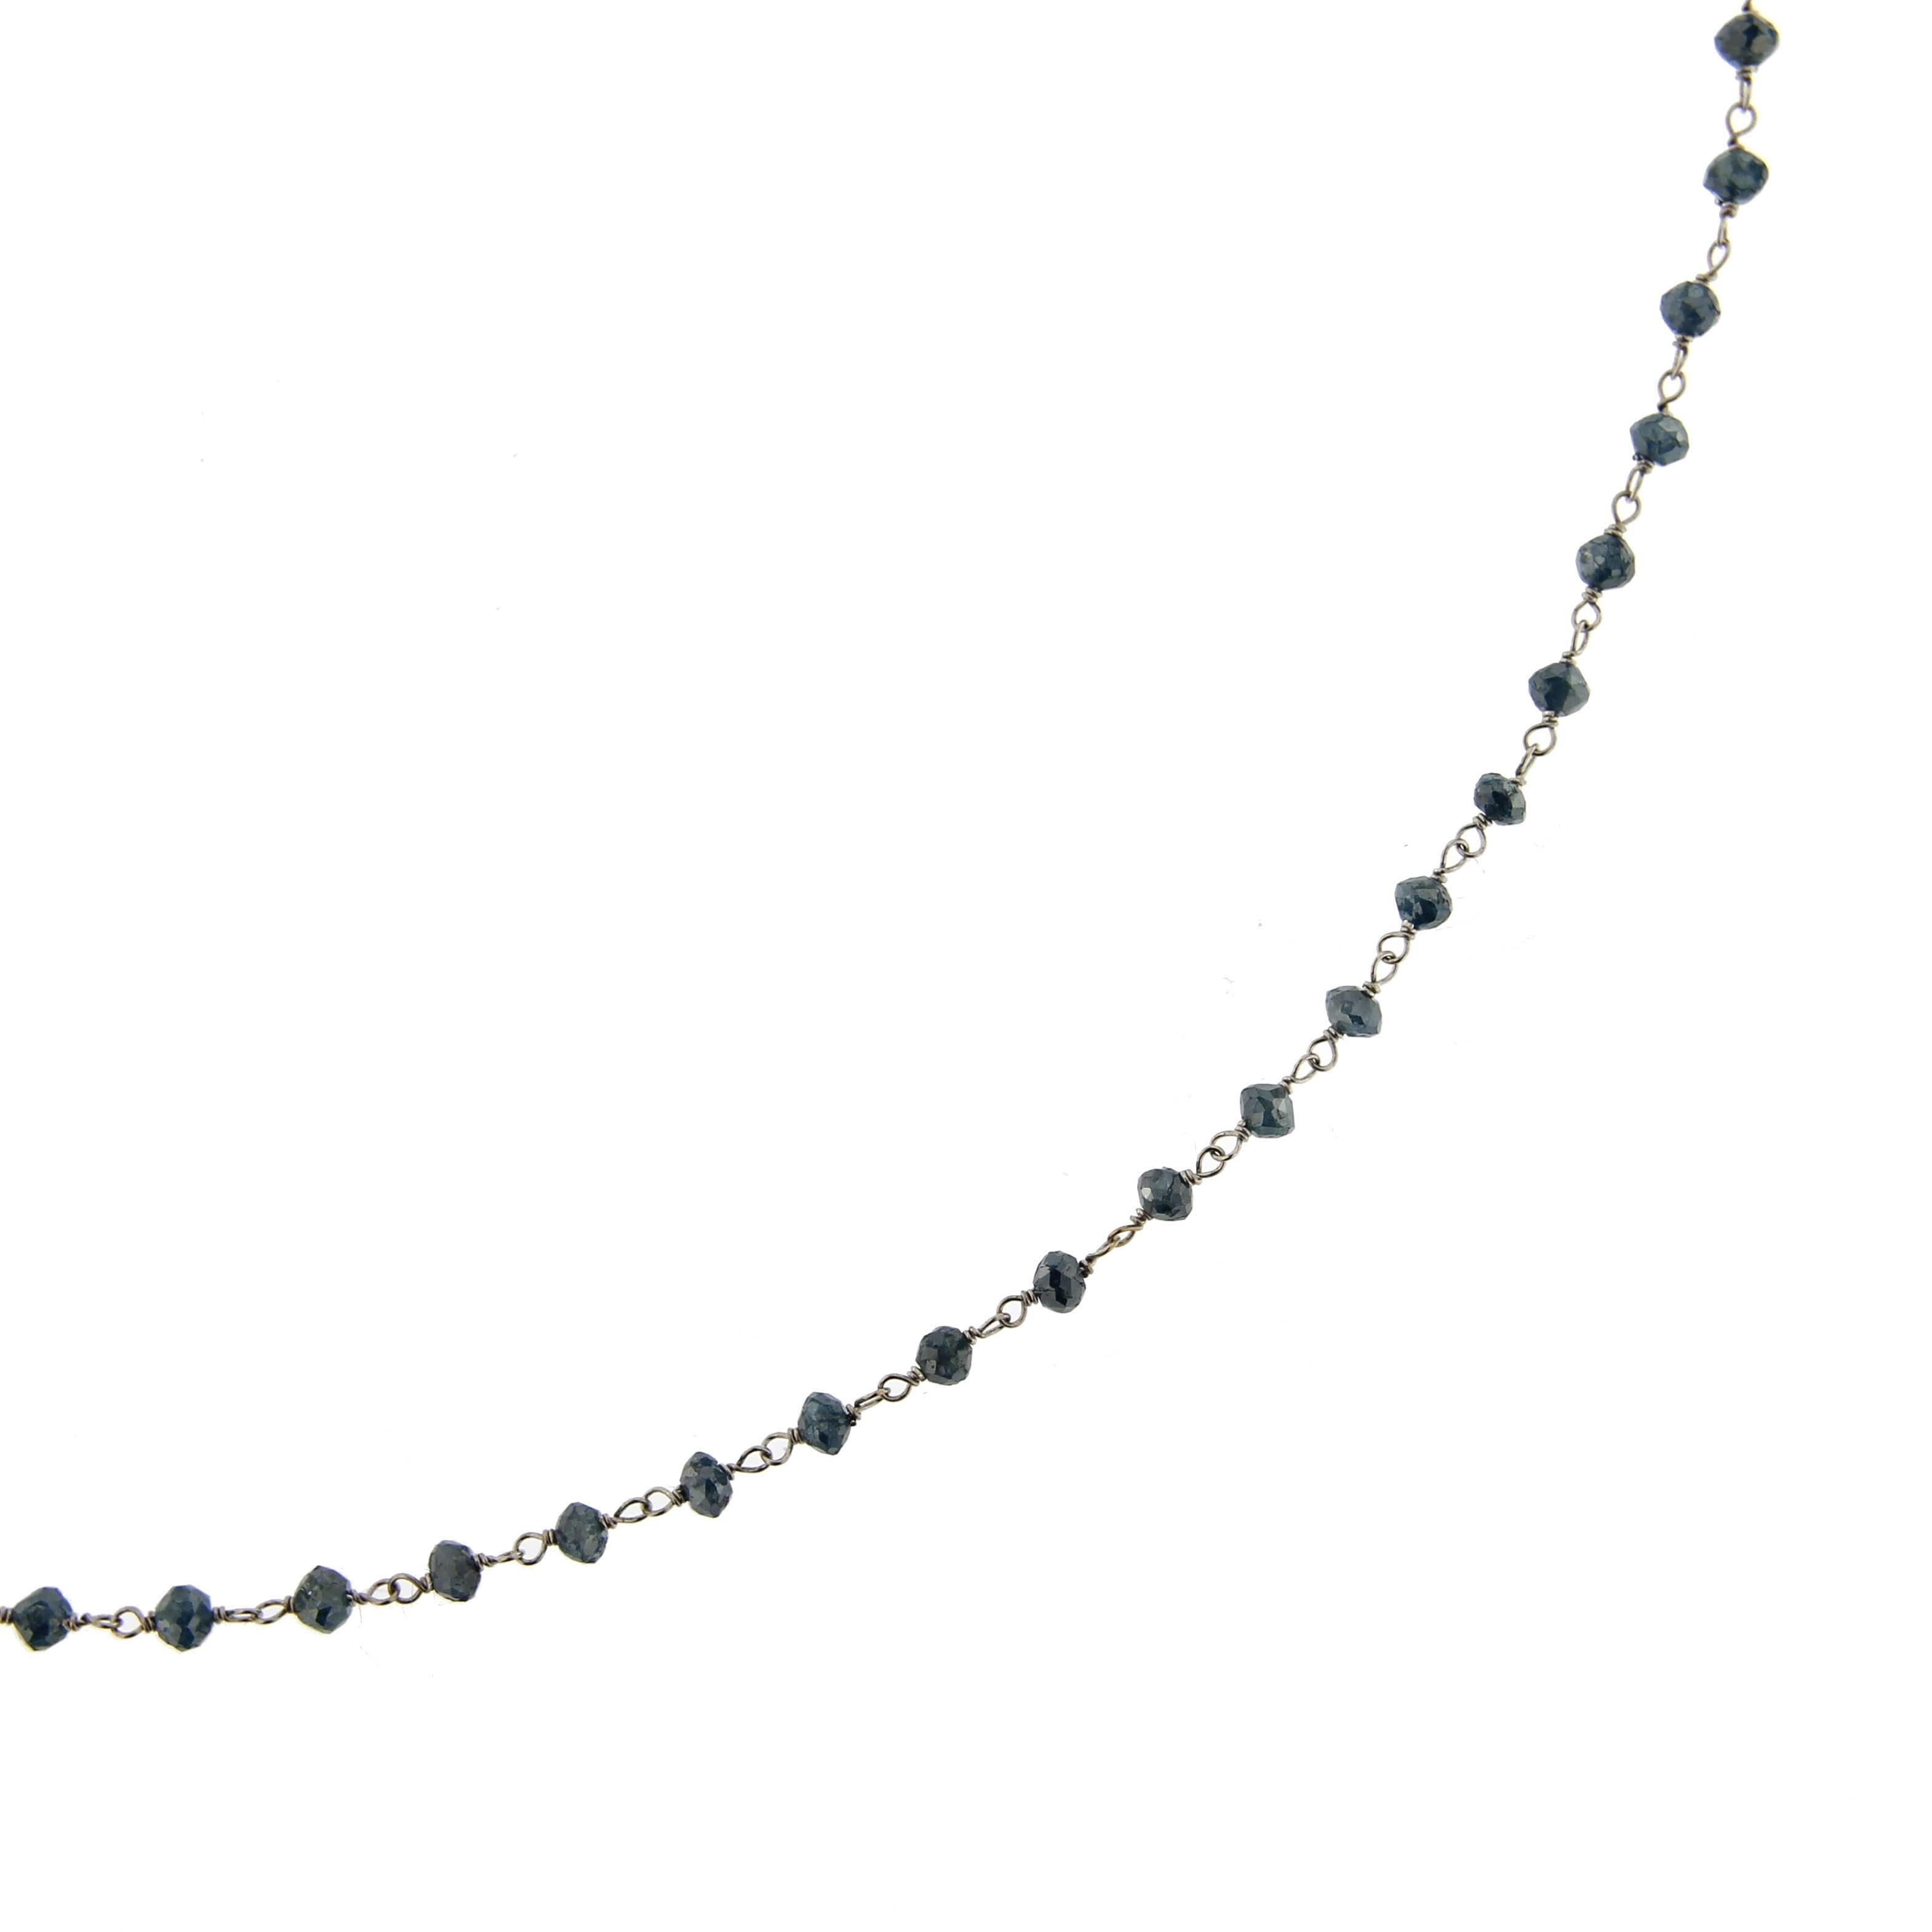 Jona design collection, hand crafted in Italy, 18 karat white gold necklace, featuring 10.10 carats of blue faceted diamonds beads. 
Lenght: cm 45/in 17.71. 
All Jona jewelry is new and has never been previously owned or worn.